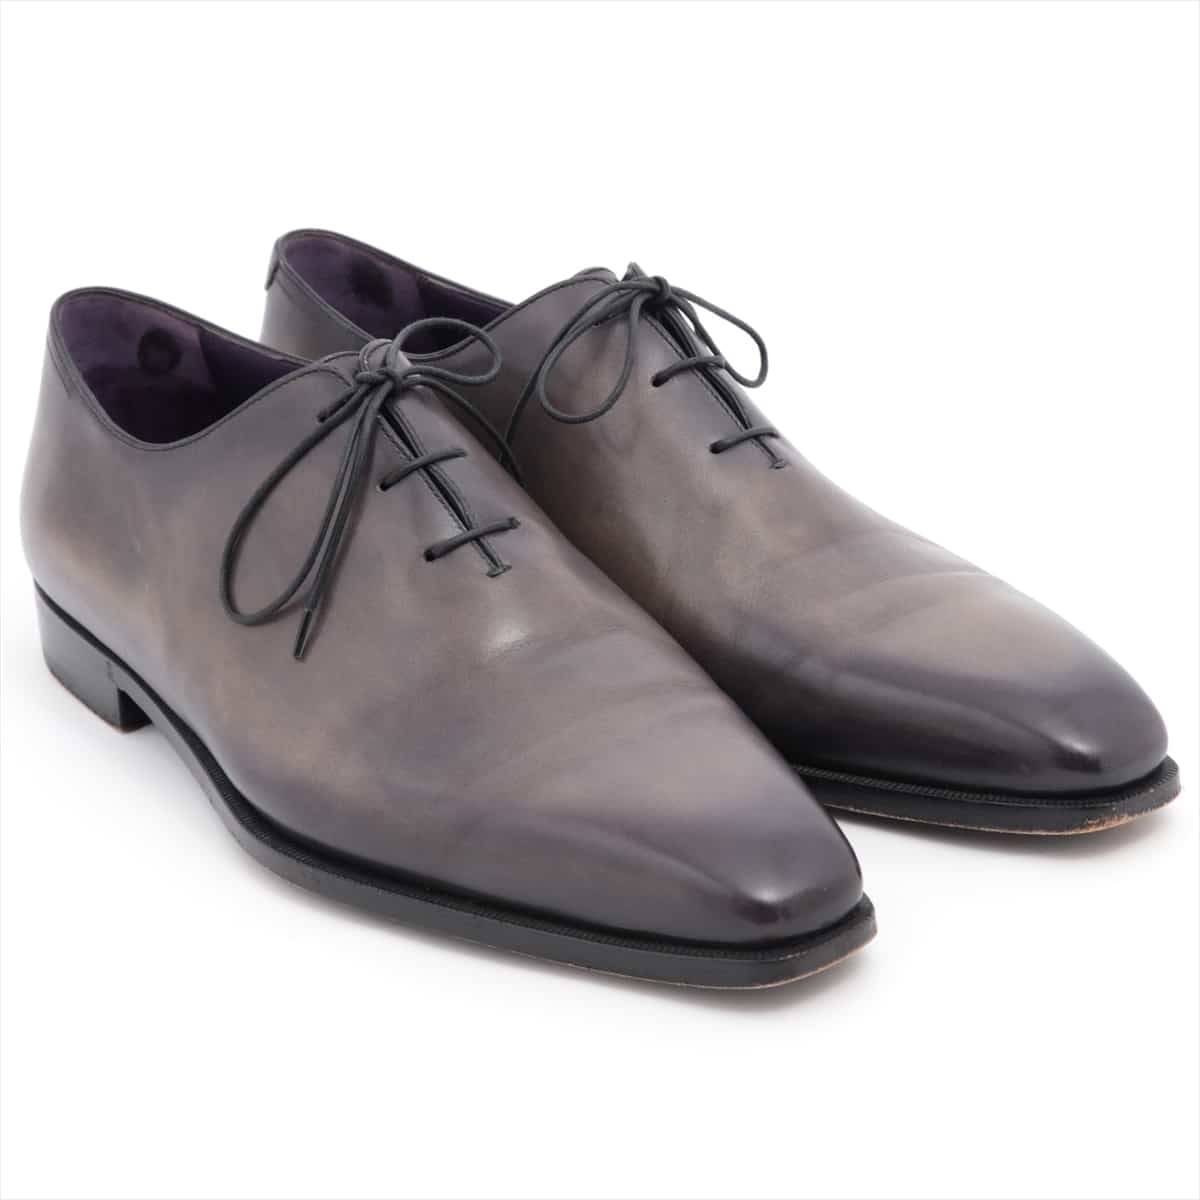 Berluti Alessandro Leather Dress shoes 9 Men's Grey With genuine shoe tree